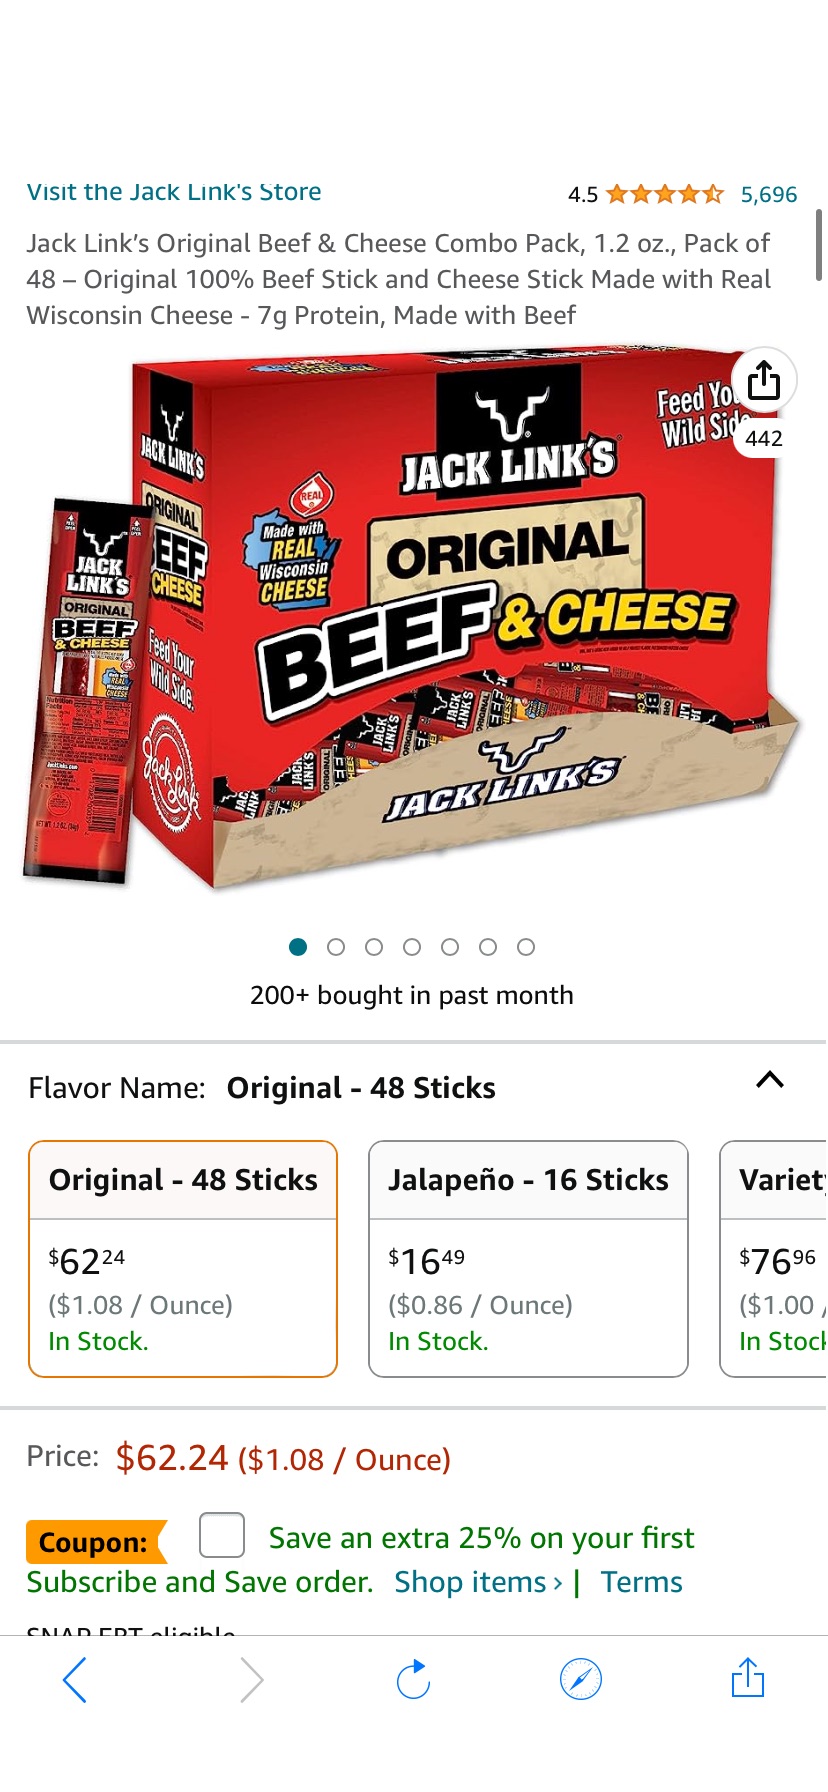 Amazon.com : Jack Link’s 原味牛肉干与芝士零食包Original Beef & Cheese Combo Pack, 1.2 oz., Pack of 48 – Original 100% Beef Stick and Cheese Stick Made with Real Wisconsin Cheese - 7g Protein, Made with Beef : Everything Else